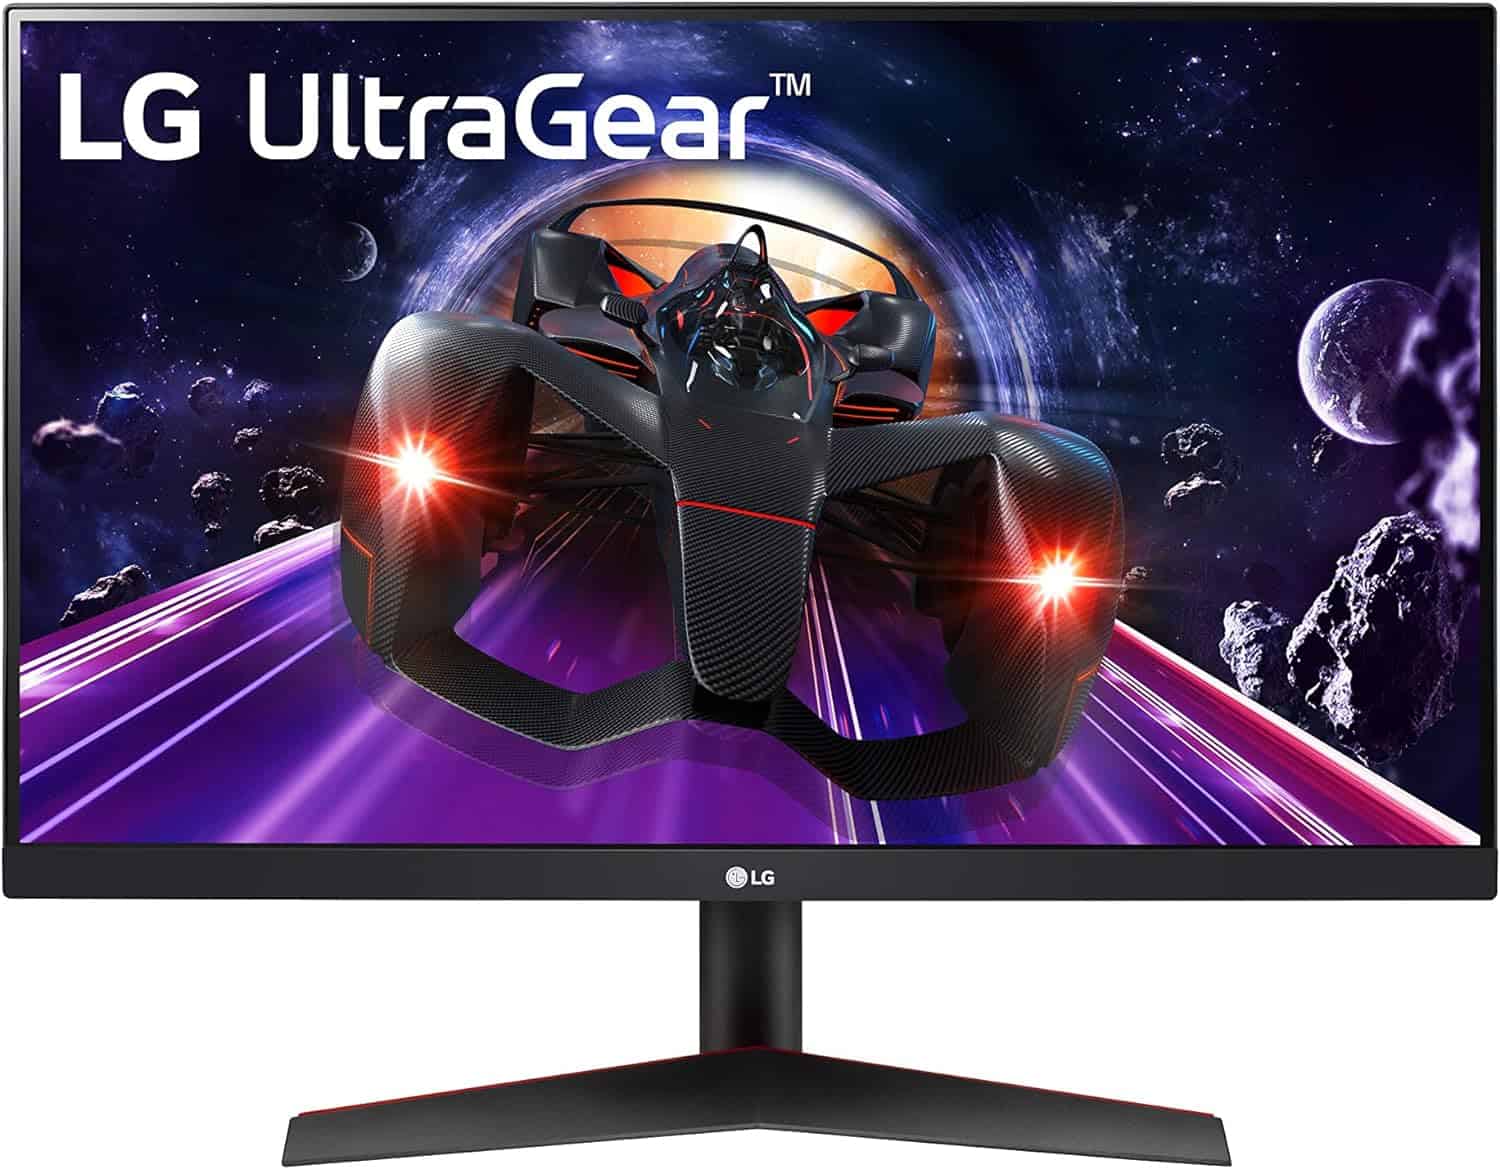 The LG 24GN600-B ultra gear monitor is shown on a white background.